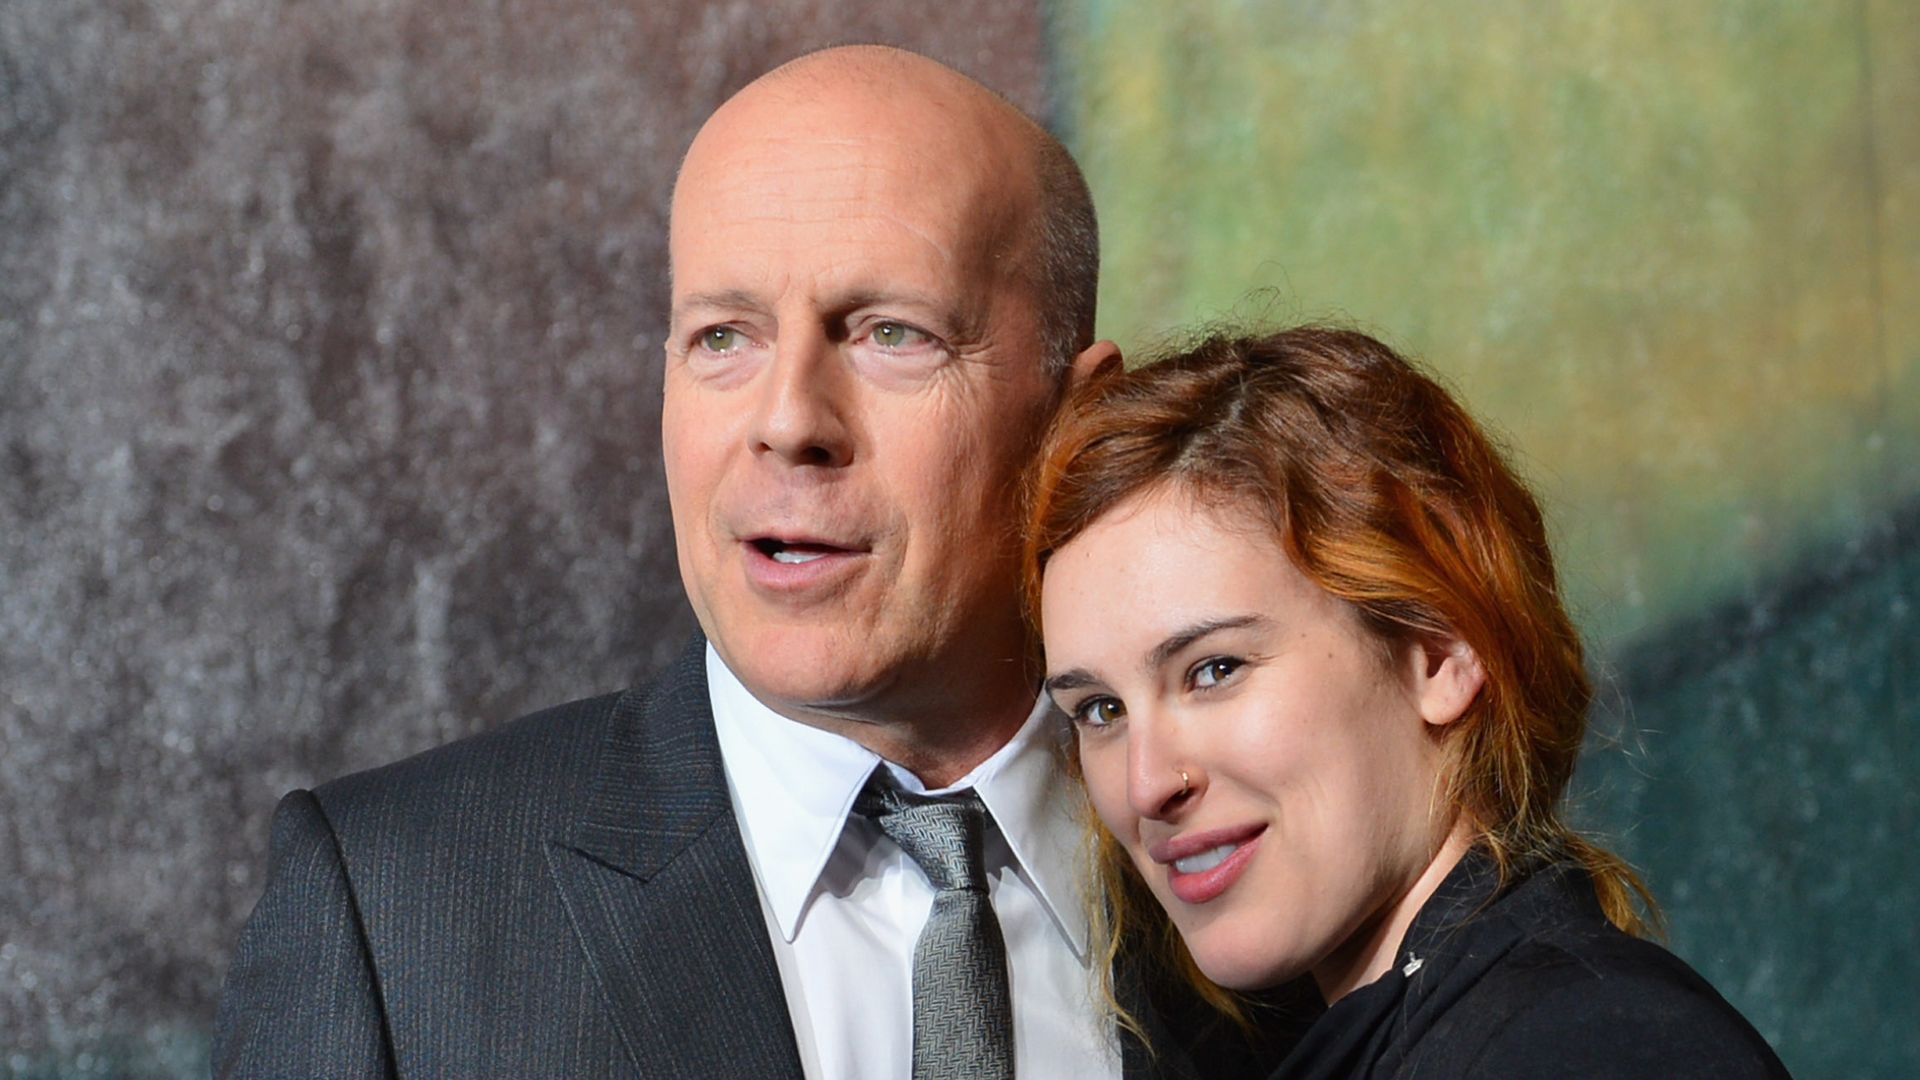 Bruce Willis and actress Rumer Willis attend the dedication and unveiling of a new soundstage mural celebrating 25 years of "Die Hard" at Fox Studio Lot on January 31, 2013 in Century City, California